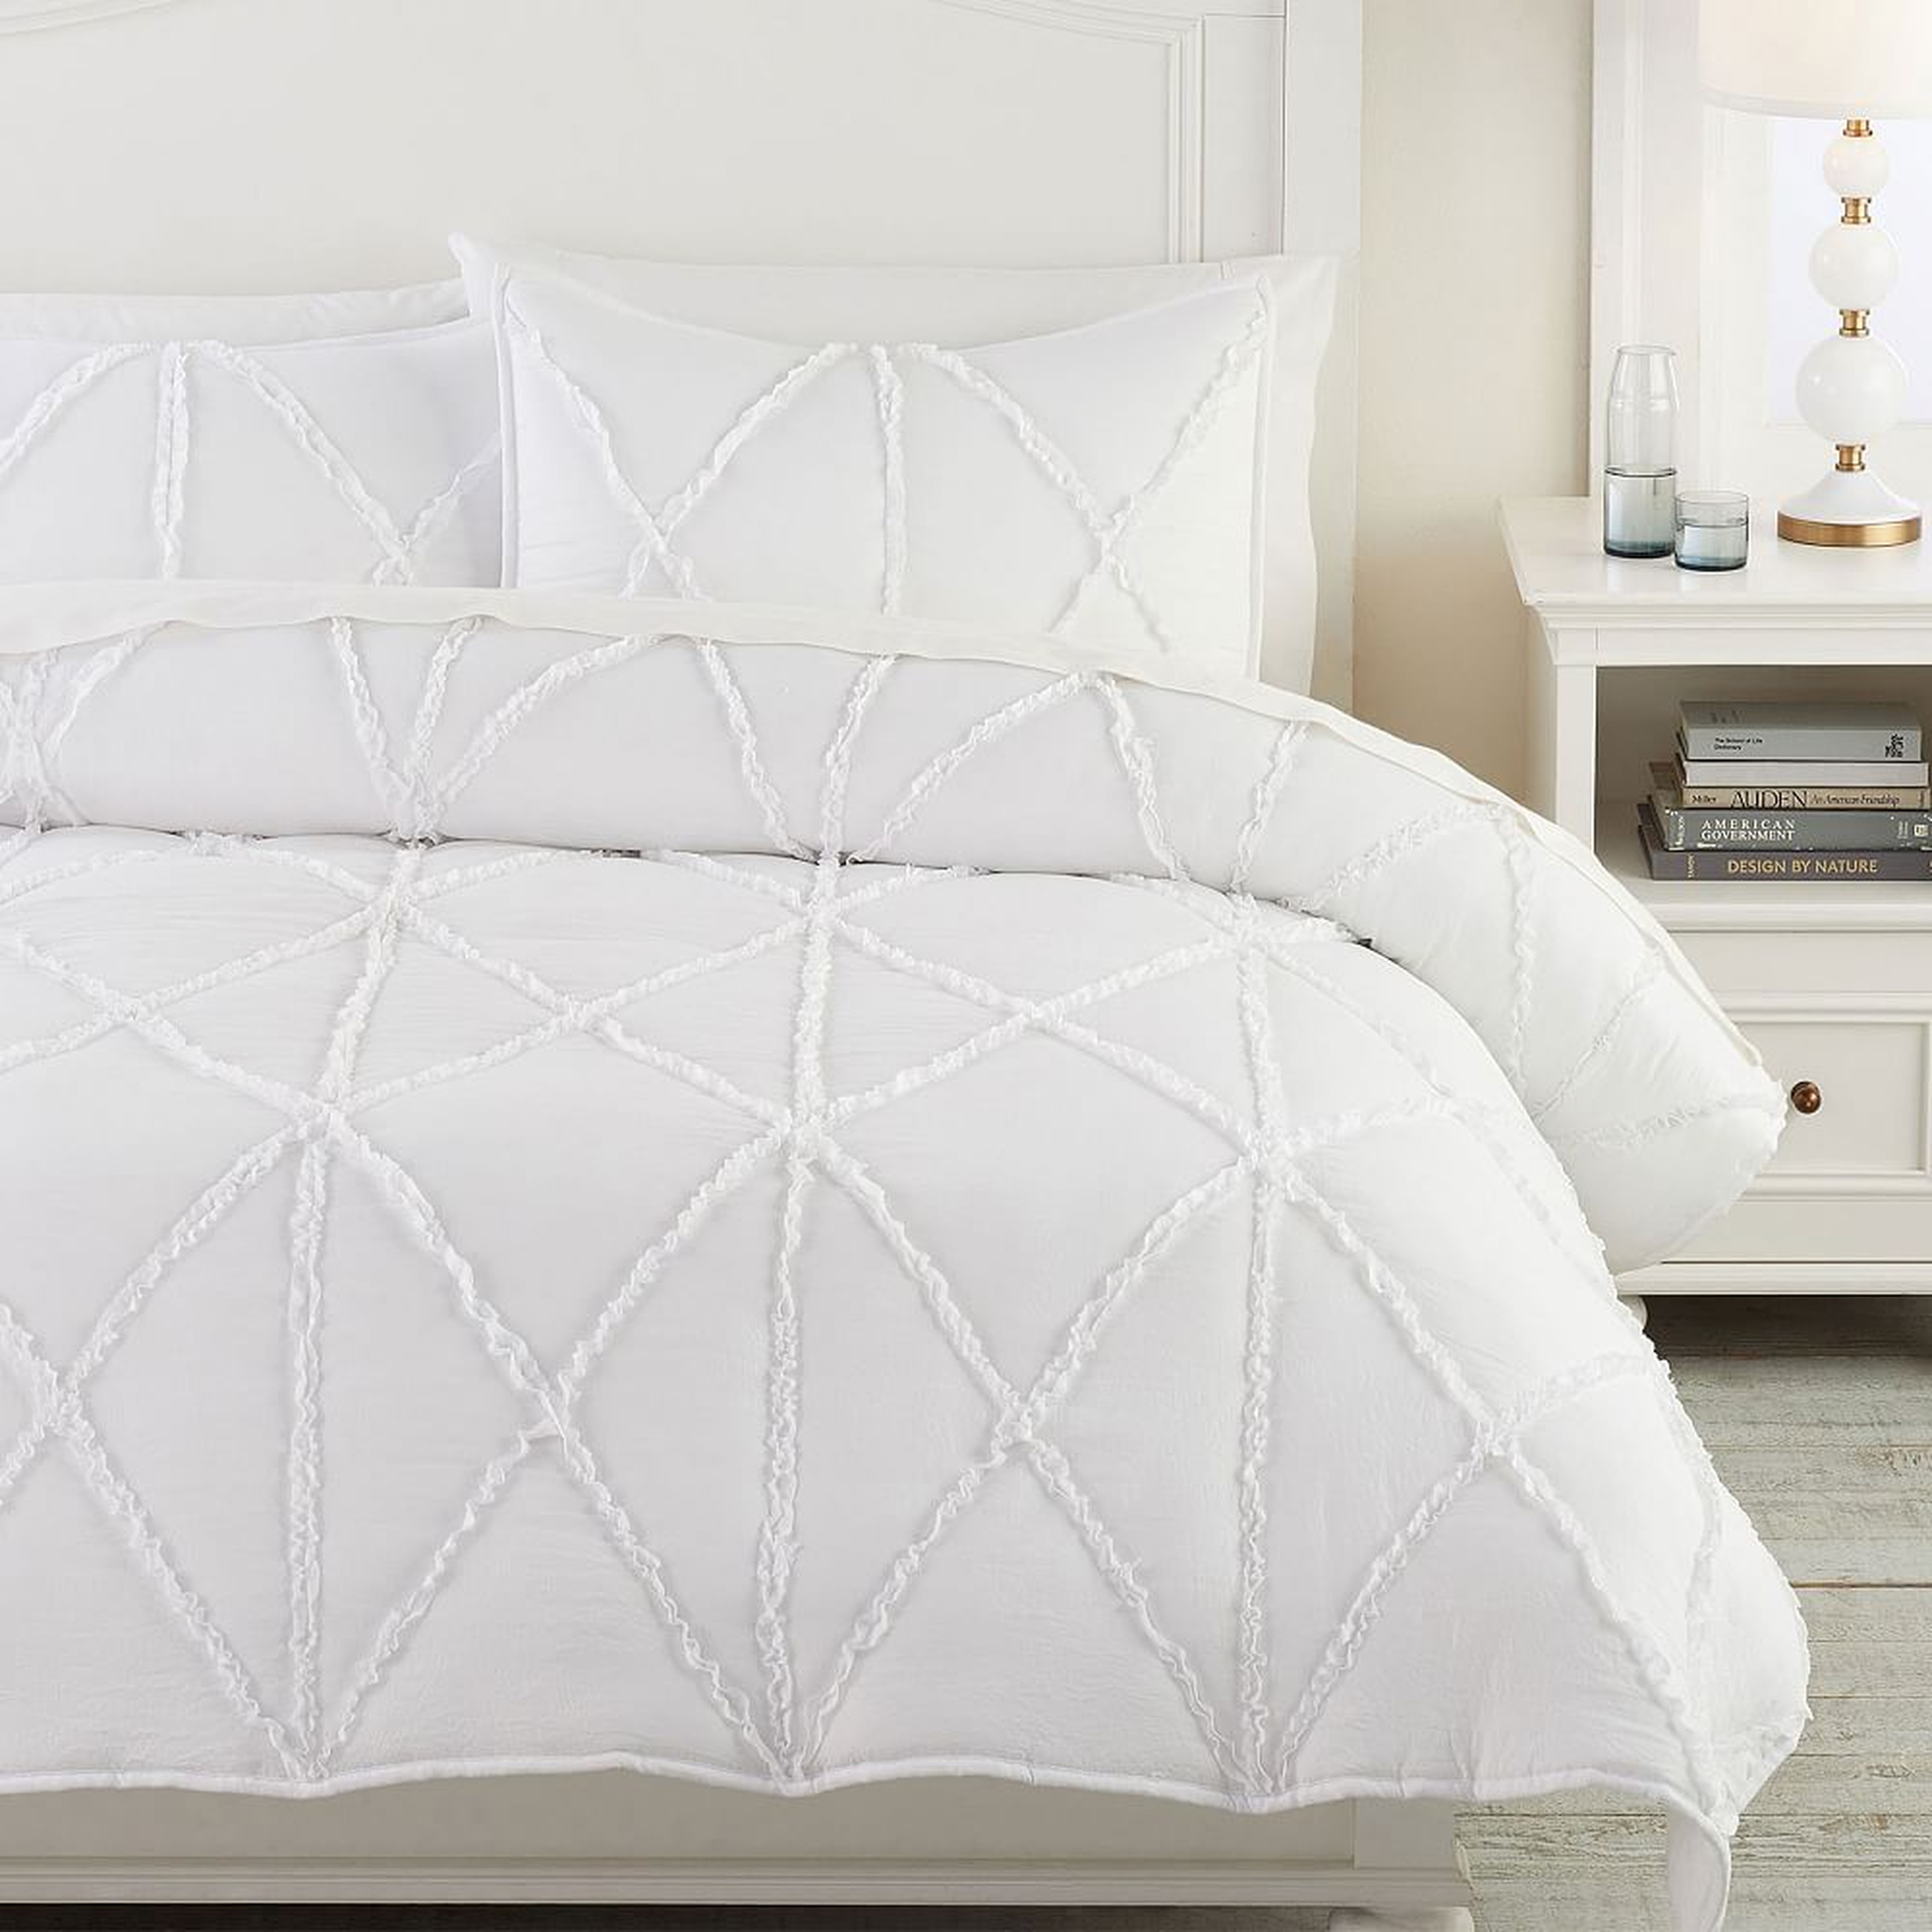 Recycled Microfiber Casual Ruffle Quilt, Full/Queen & 2 Standard Shams , White - Pottery Barn Teen